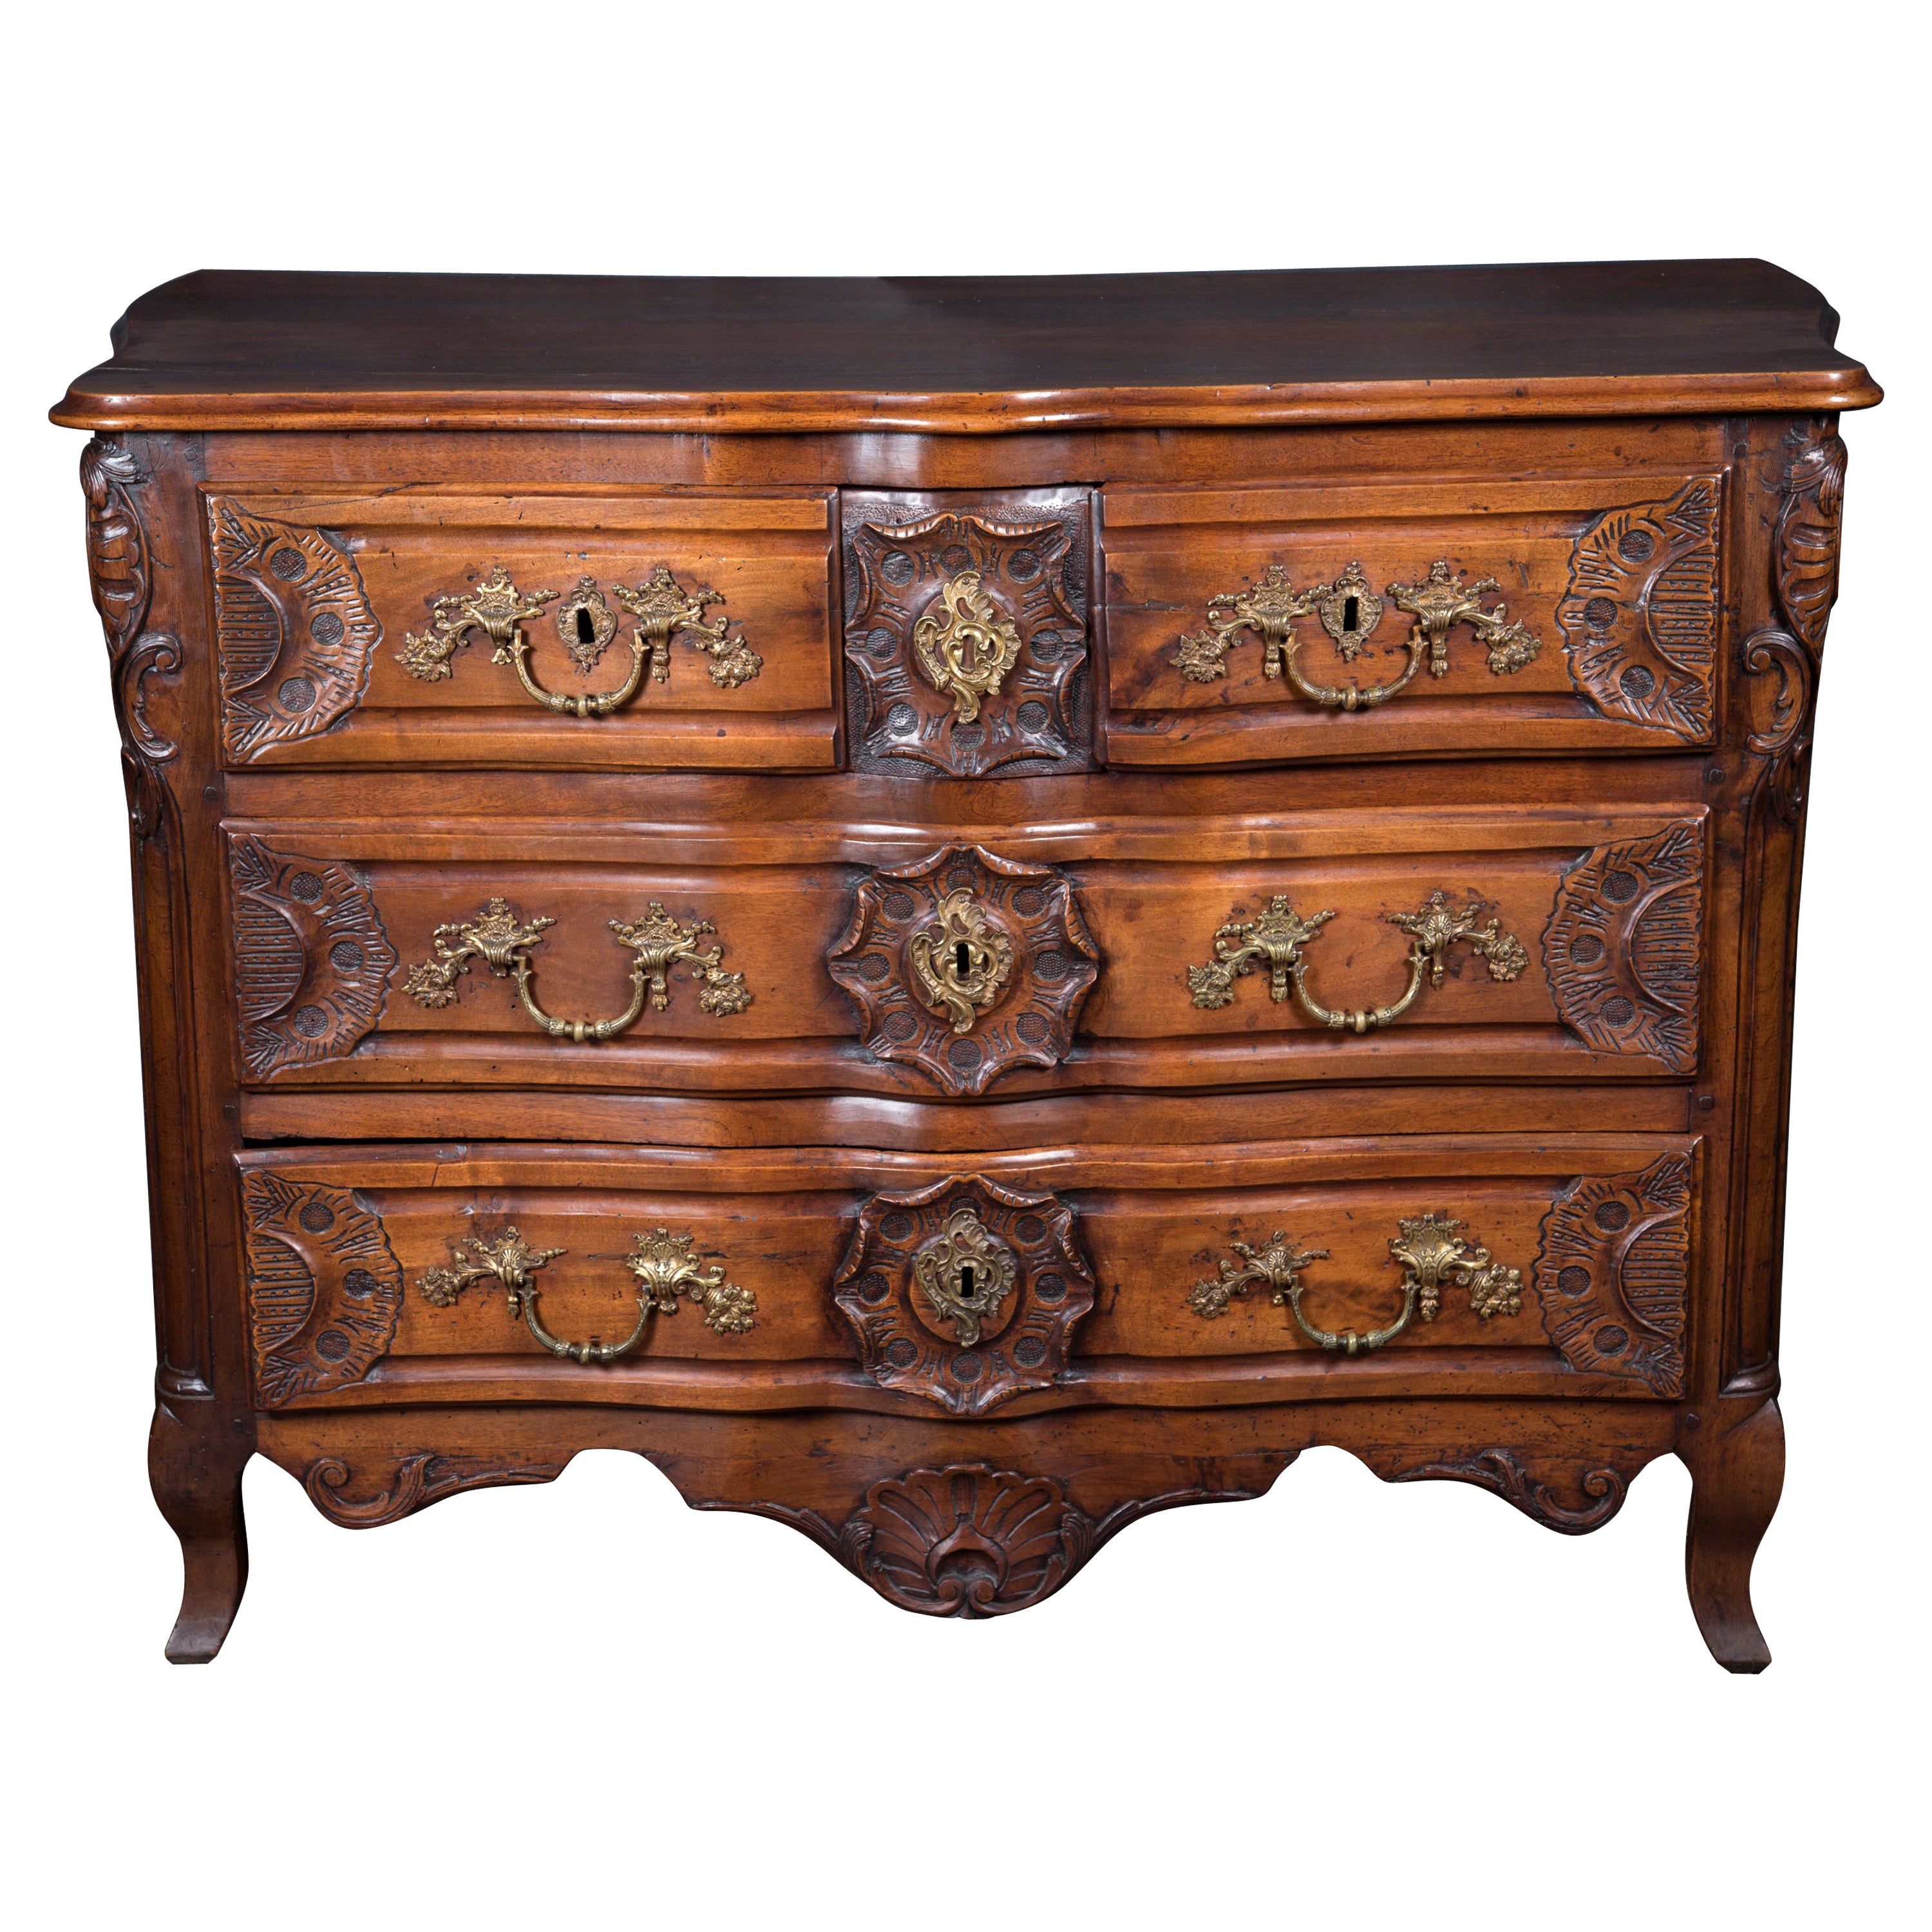 Early 18th Century Regence Period Lyonnaise Walnut Commode / Chest of Drawers For Sale